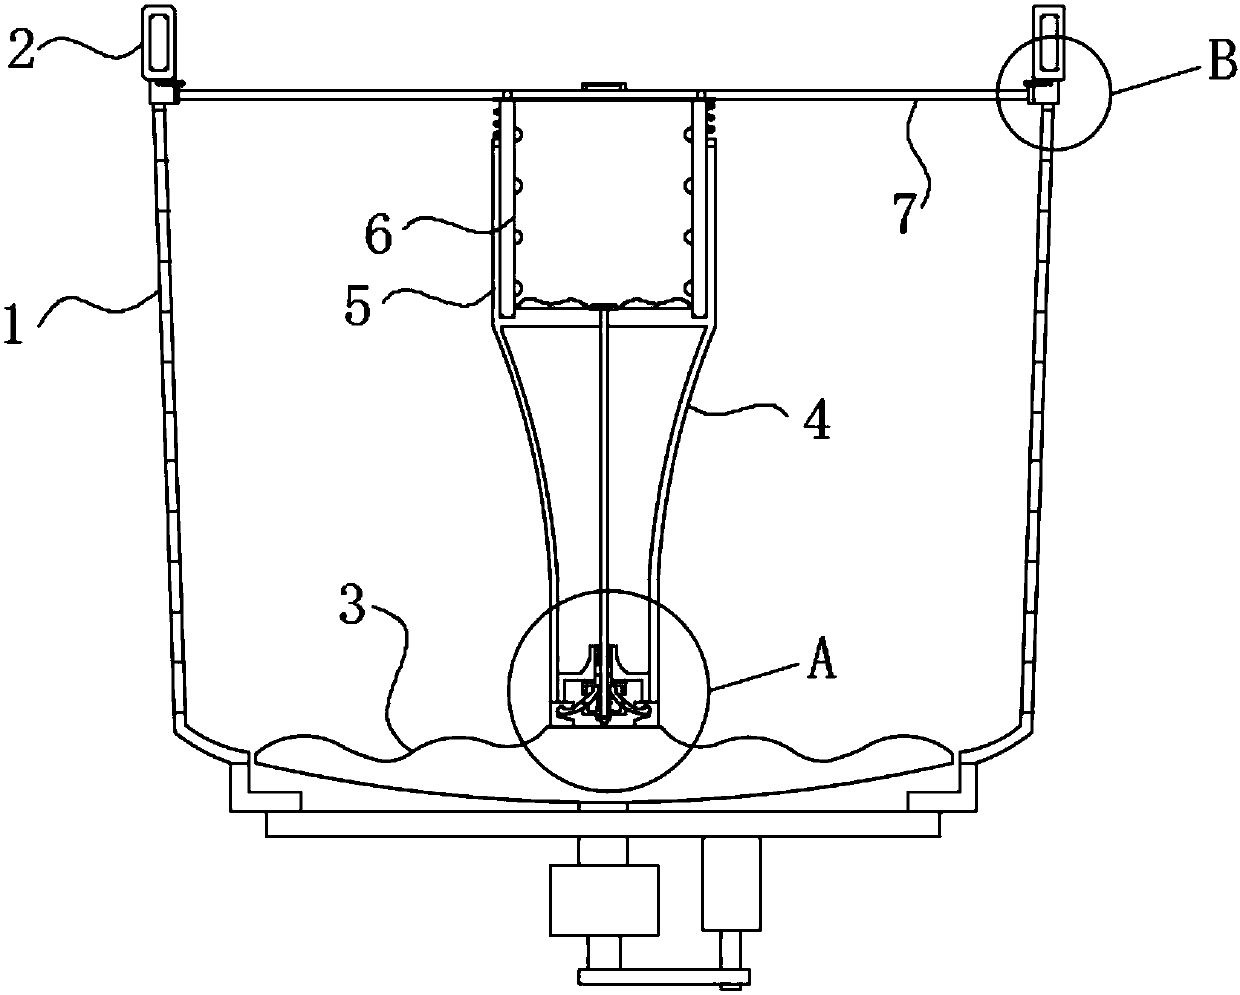 Full-automatic washing machine with internal compartments